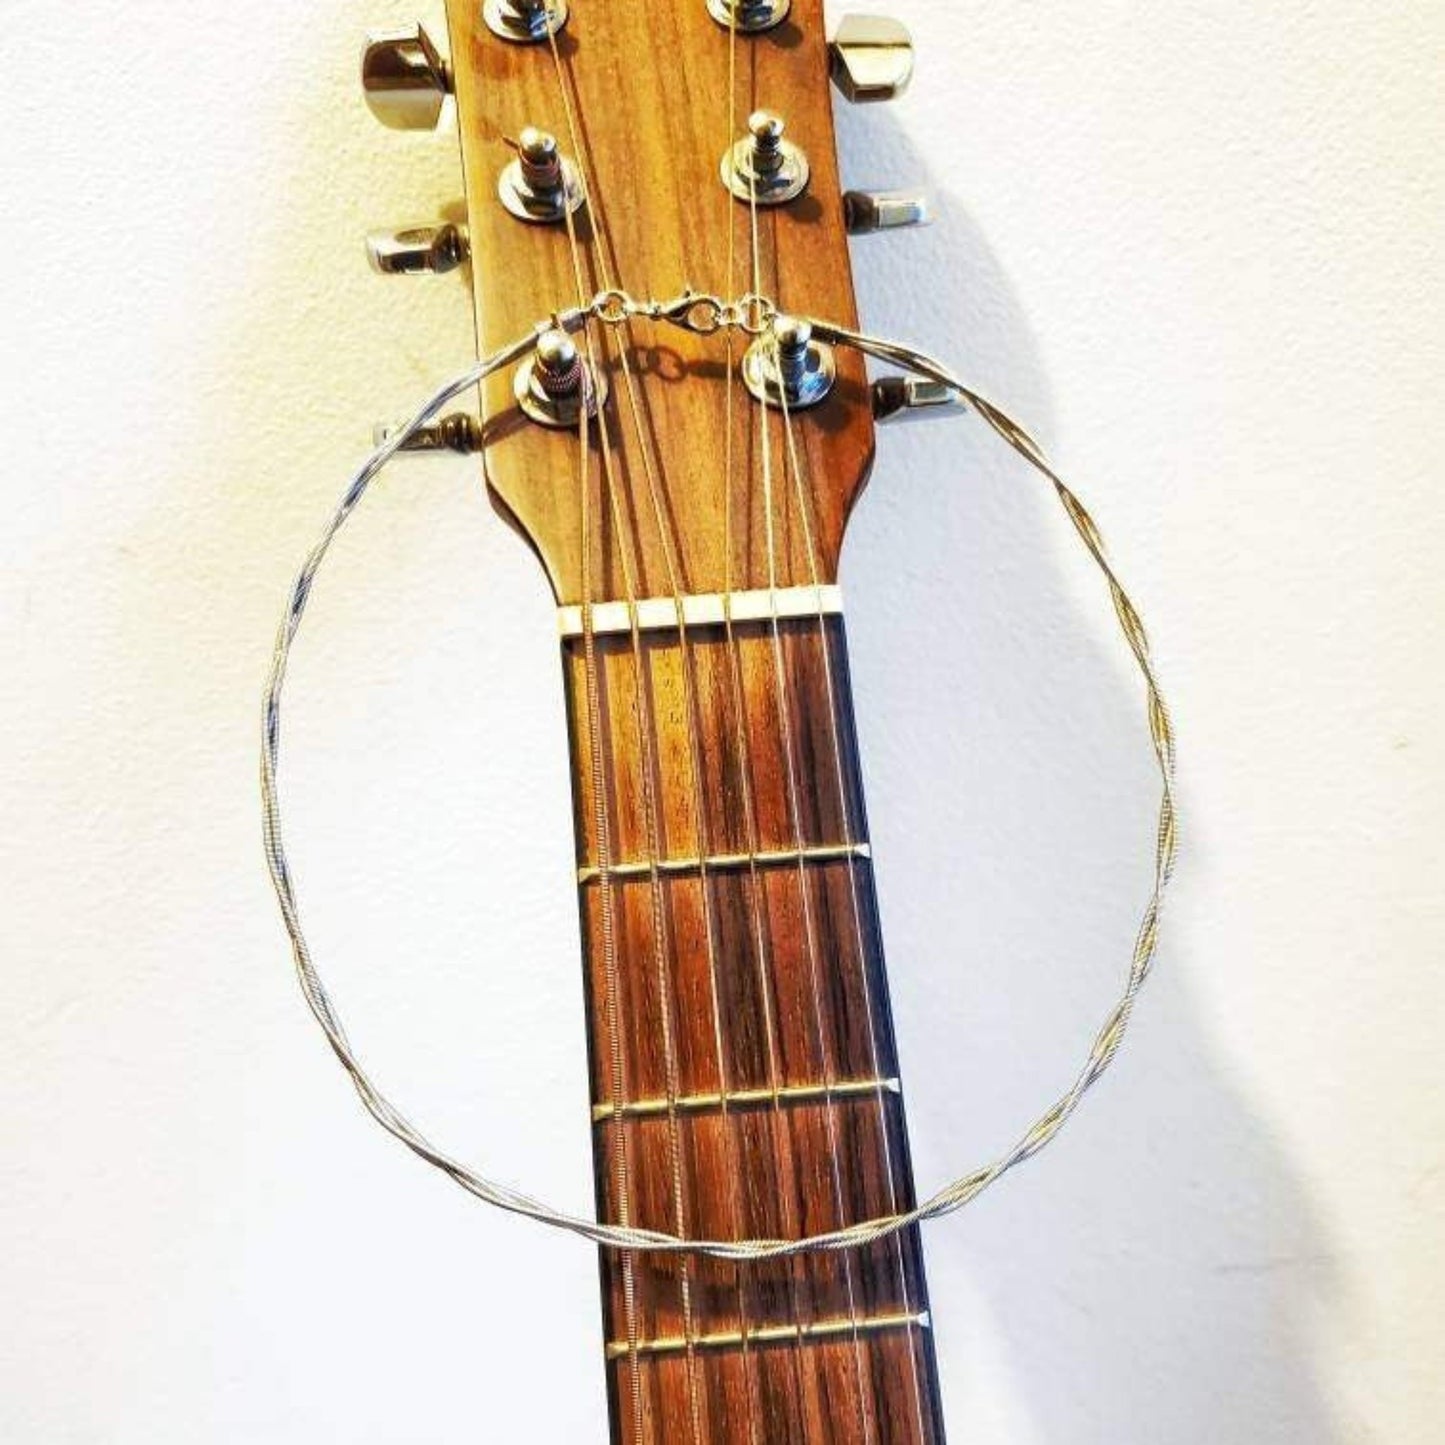 a silver chain style necklace made from braided guitar strings hangs from a wood guitar neck